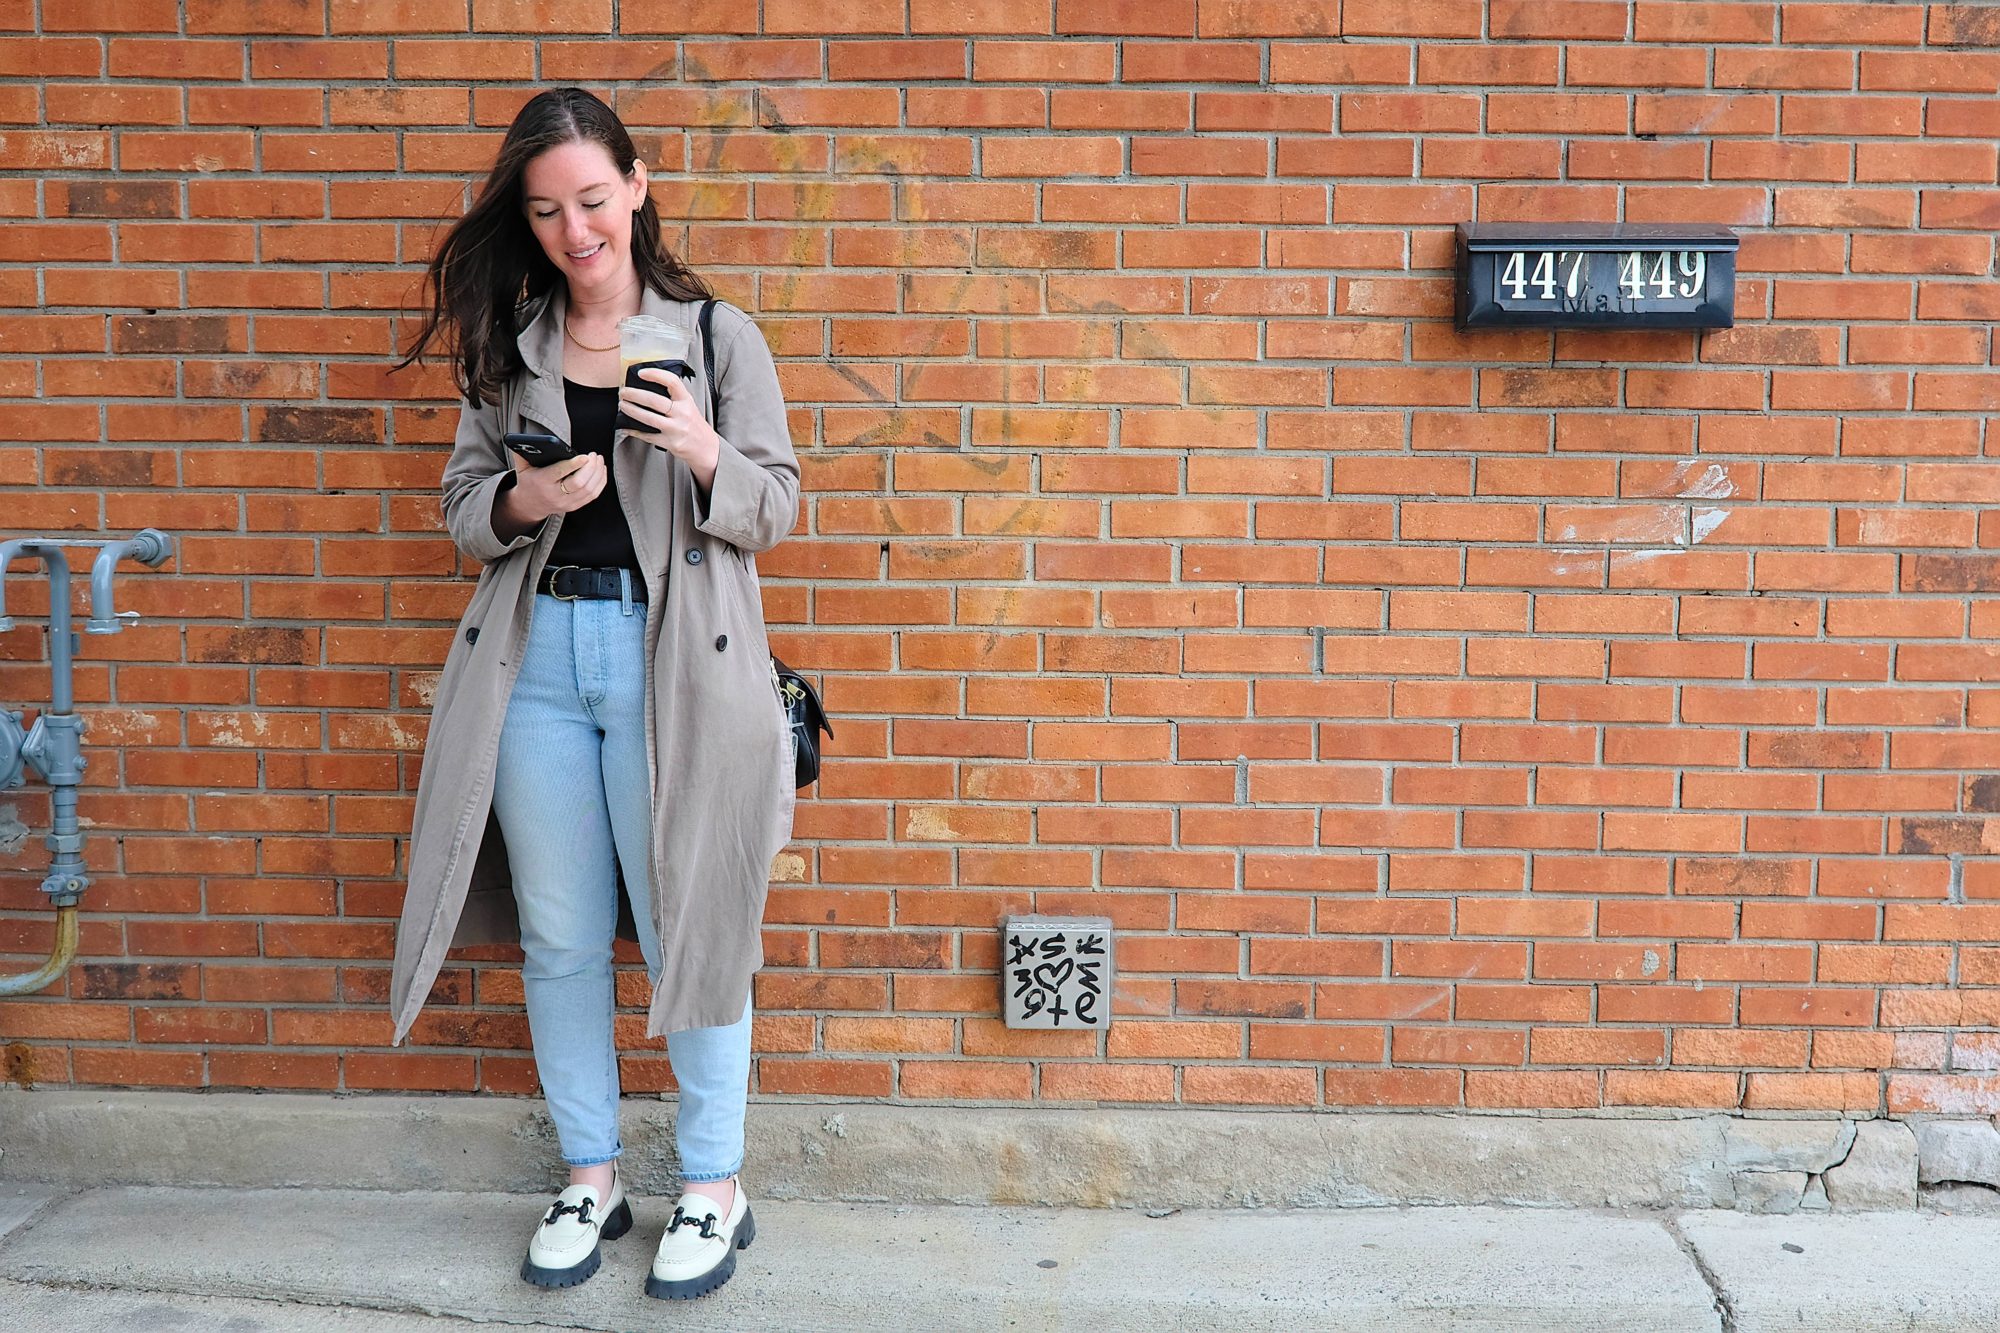 Alyssa stands on a sidewalk in Detroit, ordering an Uber and drinking a coffee